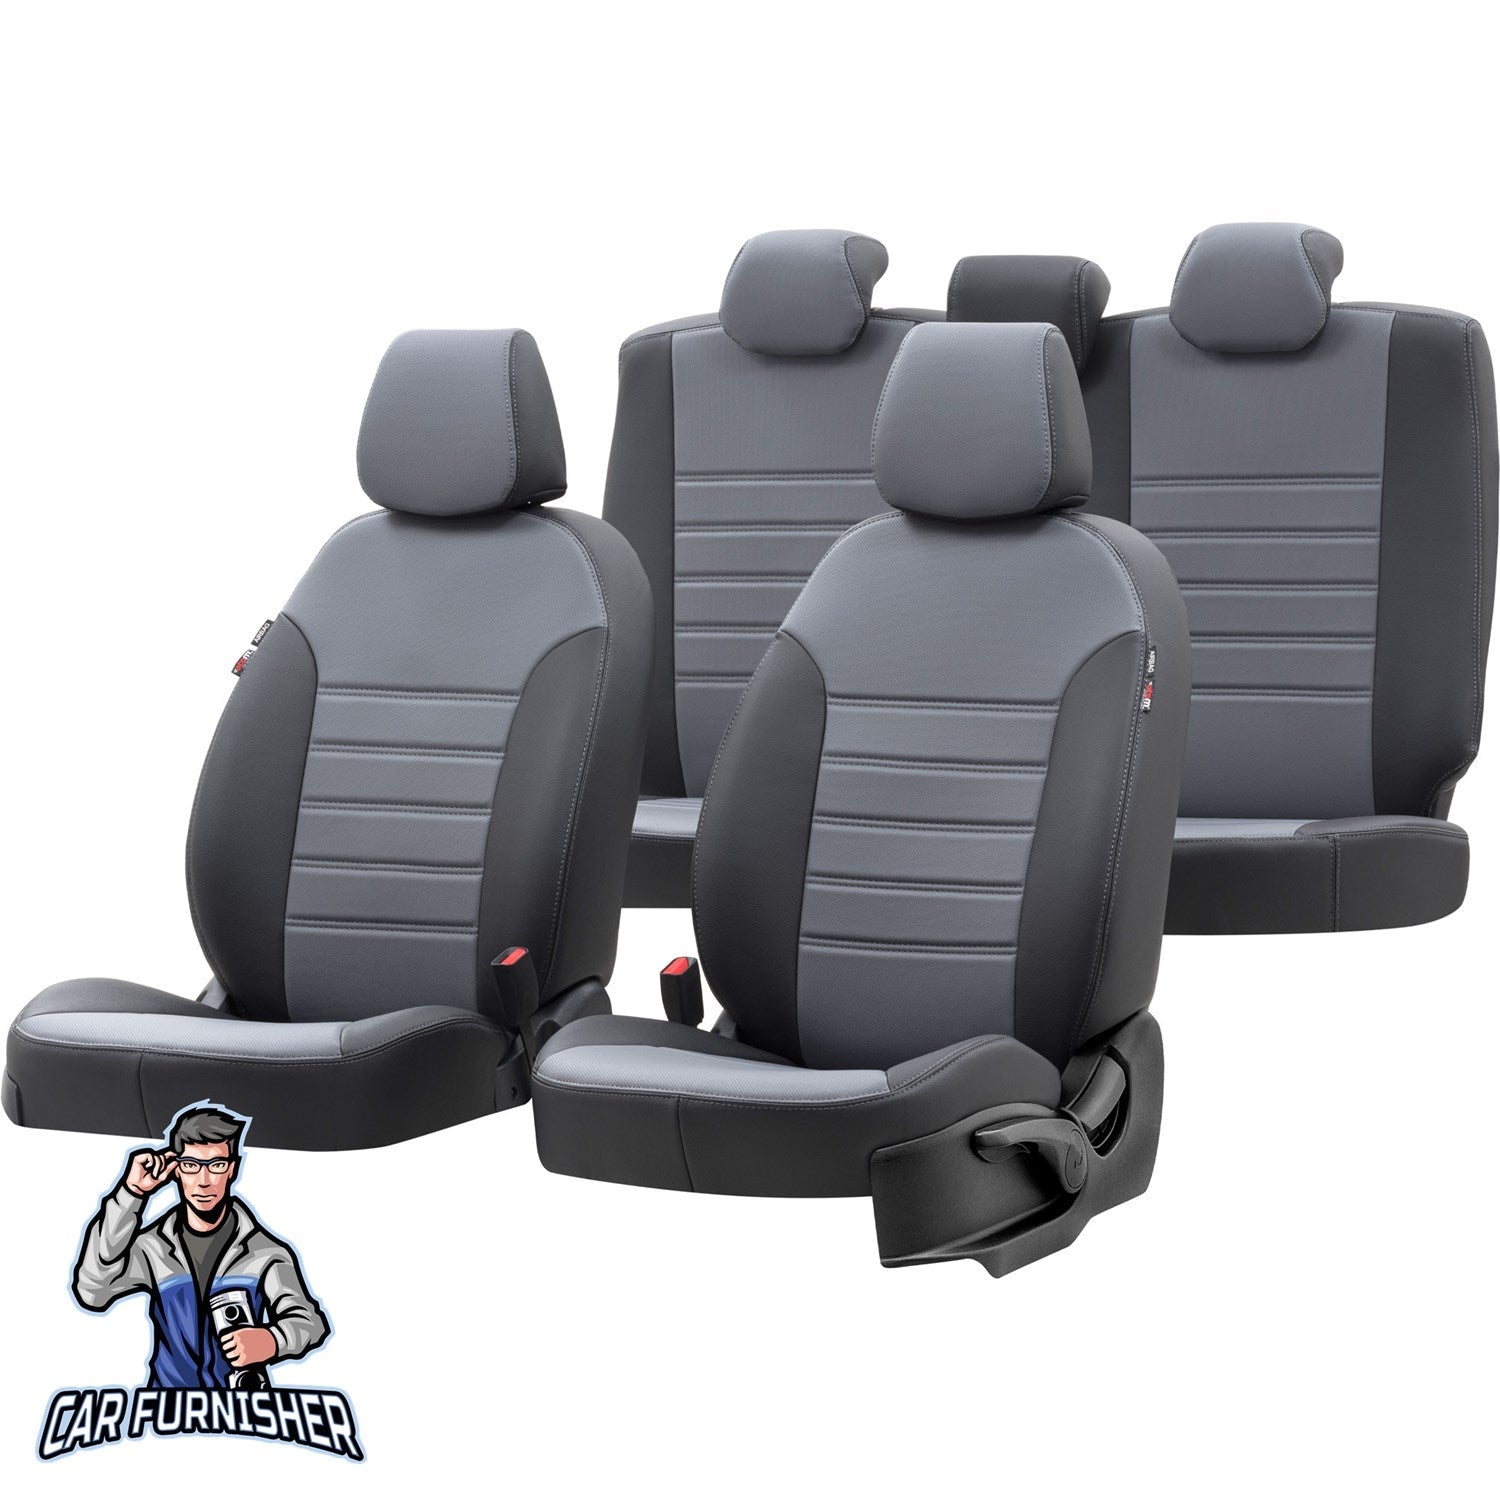 Mercedes Vito Seat Covers Istanbul Leather Design Smoked Black Leather